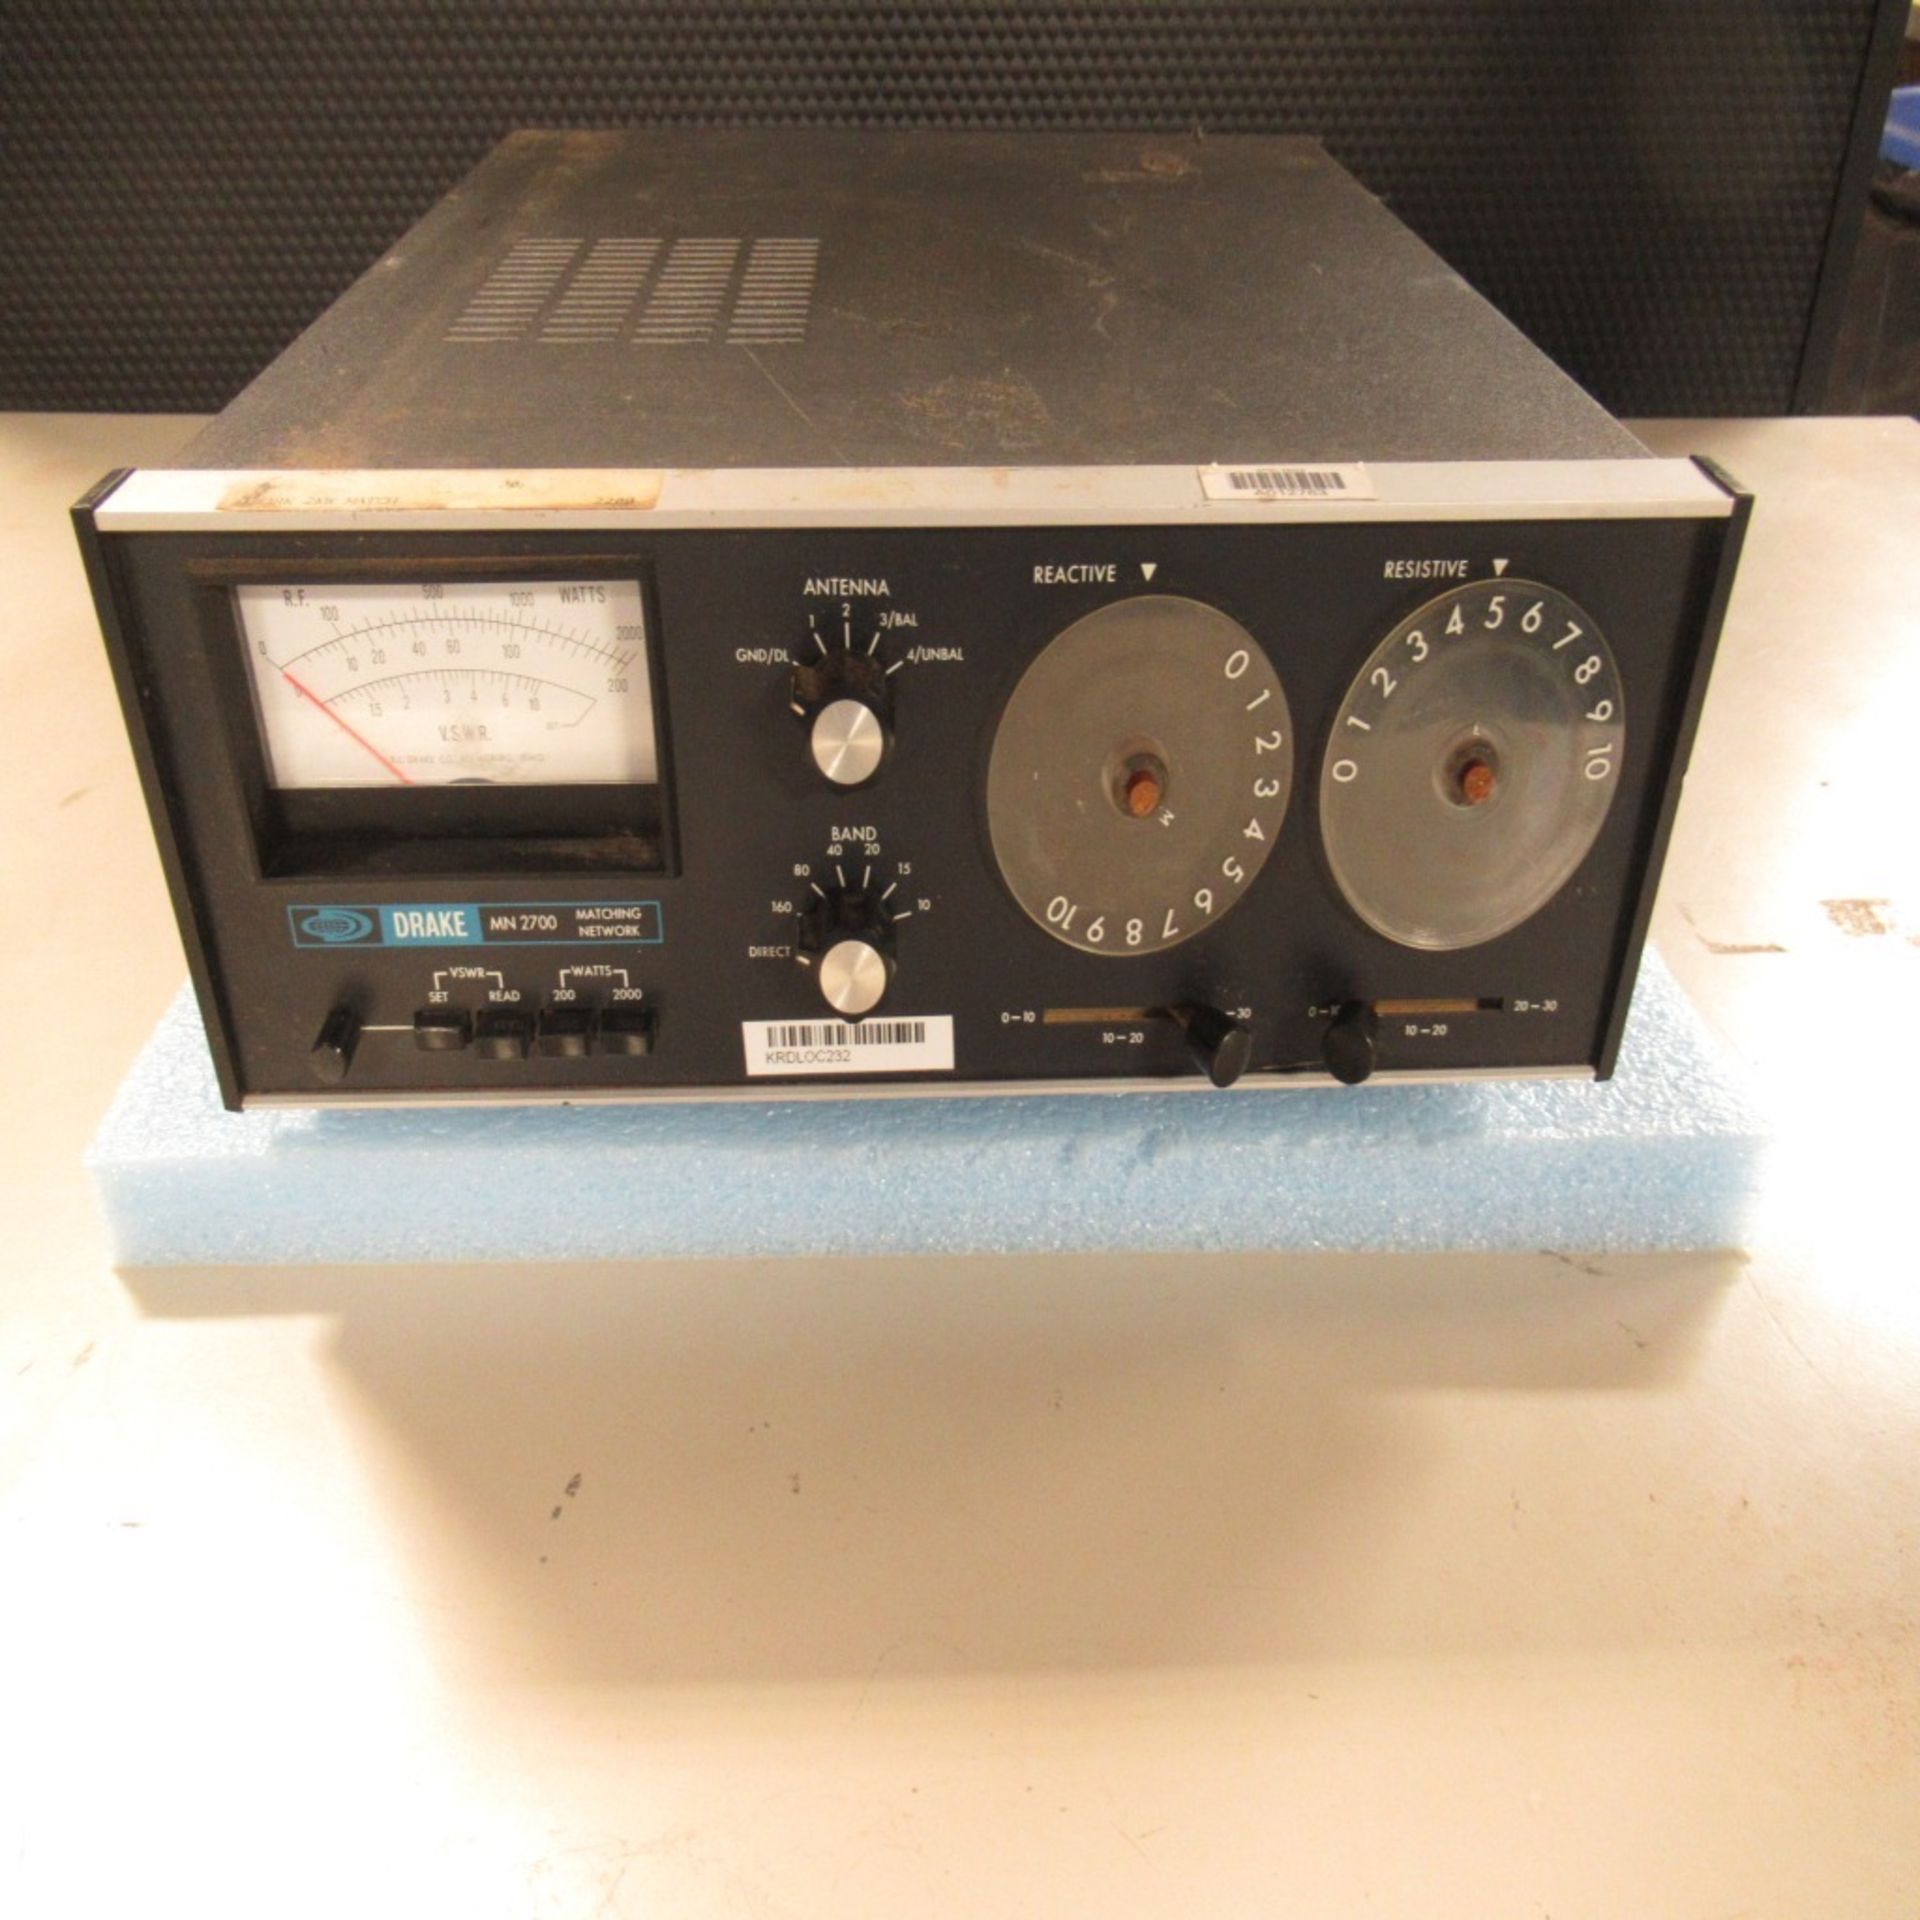 PHOTON SNAP SHOT MODEL 6000 *POWERS ON* NO SCREEN DISPLAY; FARNELL AP20-80 REGULATED POWER SUPPLY * - Image 165 of 222